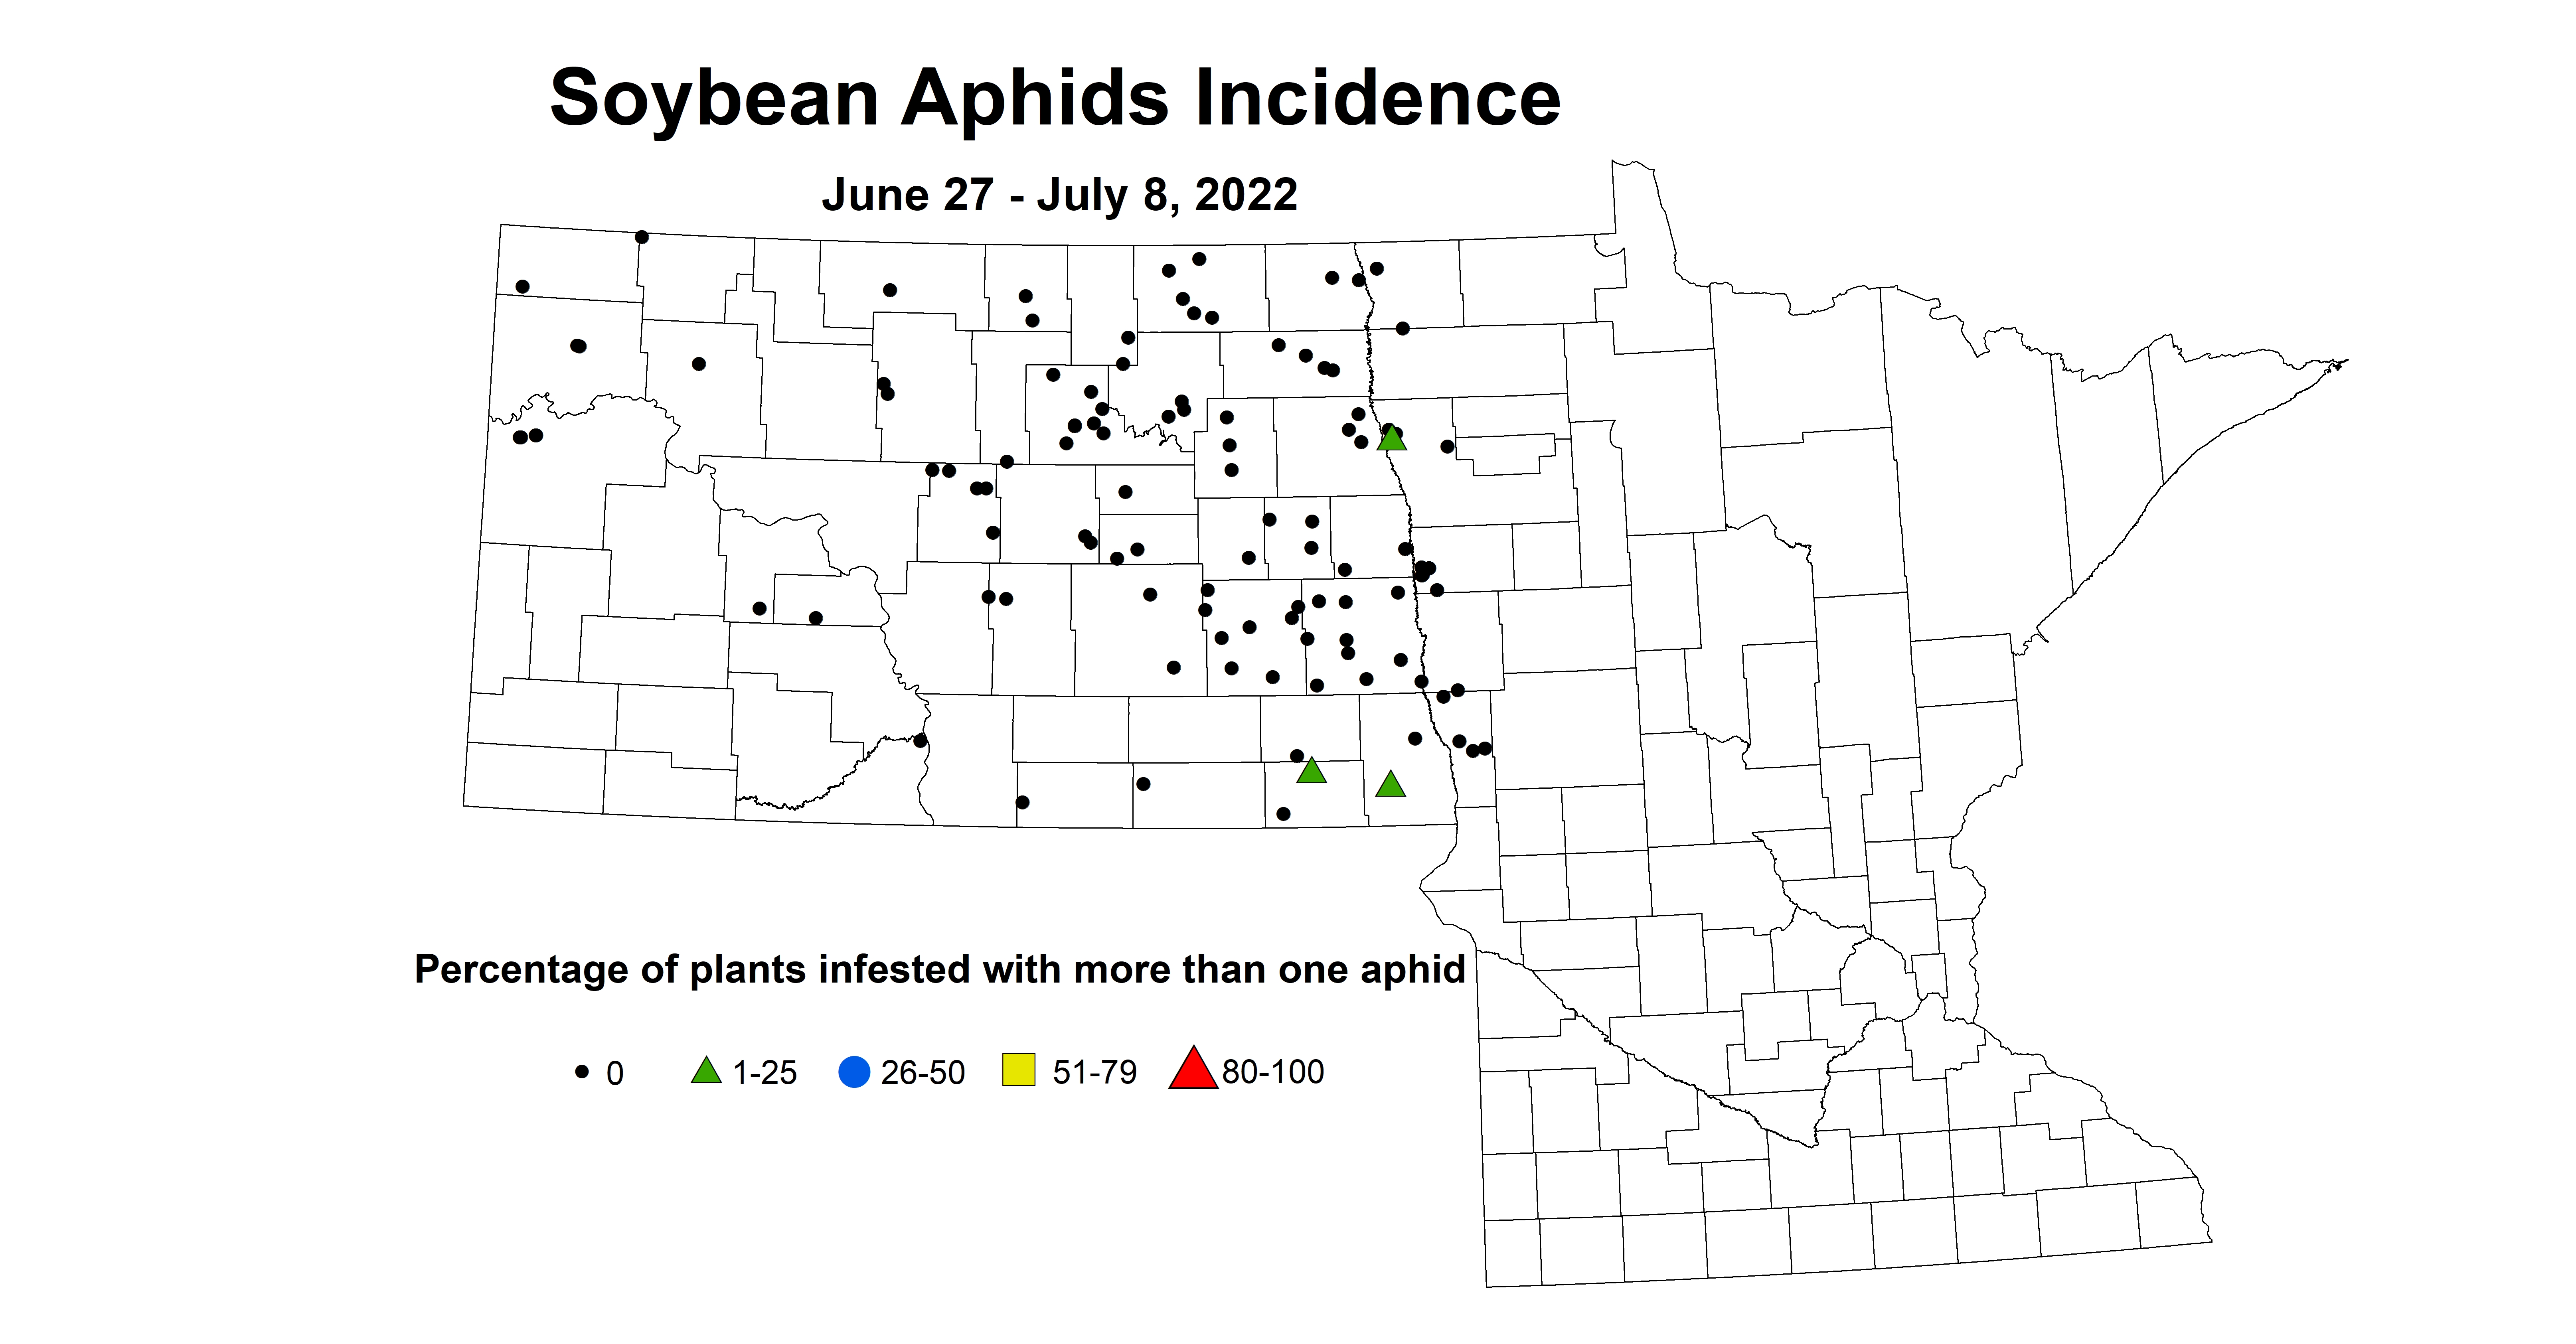 ND IPM map of soybean aphid incidence June 27 - July 8 2022